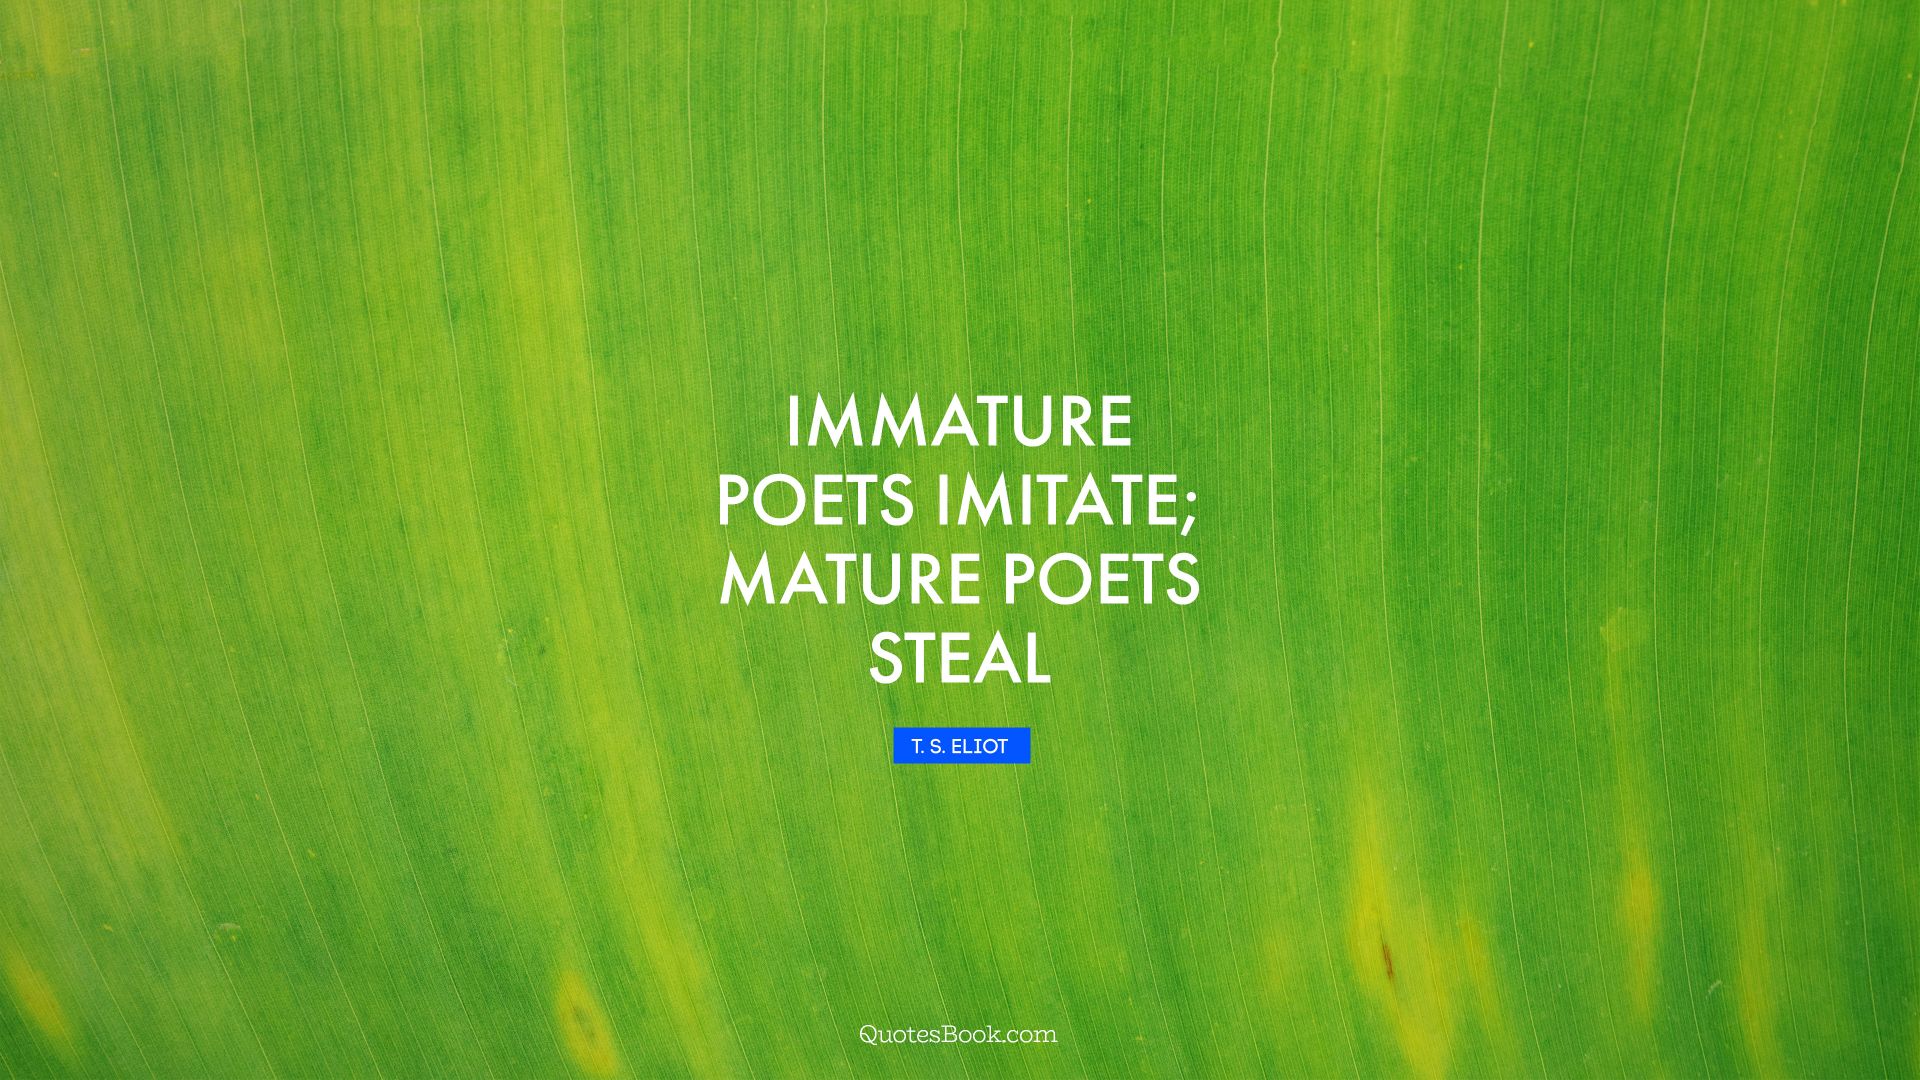 Immature poets imitate; mature poets steal. - Quote by T. S. Eliot